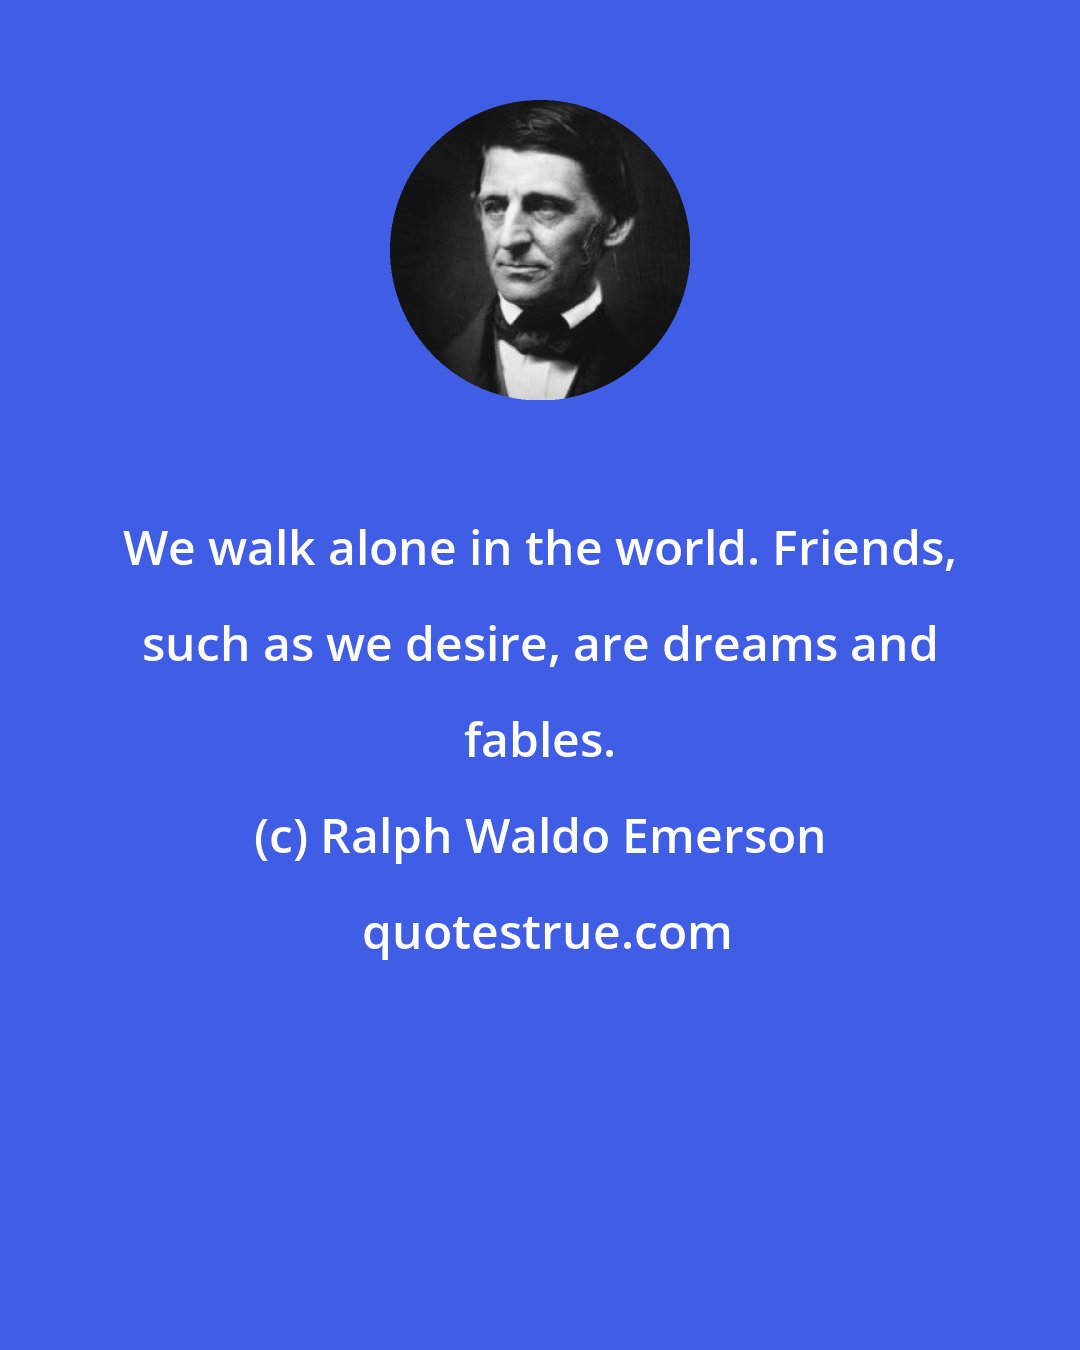 Ralph Waldo Emerson: We walk alone in the world. Friends, such as we desire, are dreams and fables.